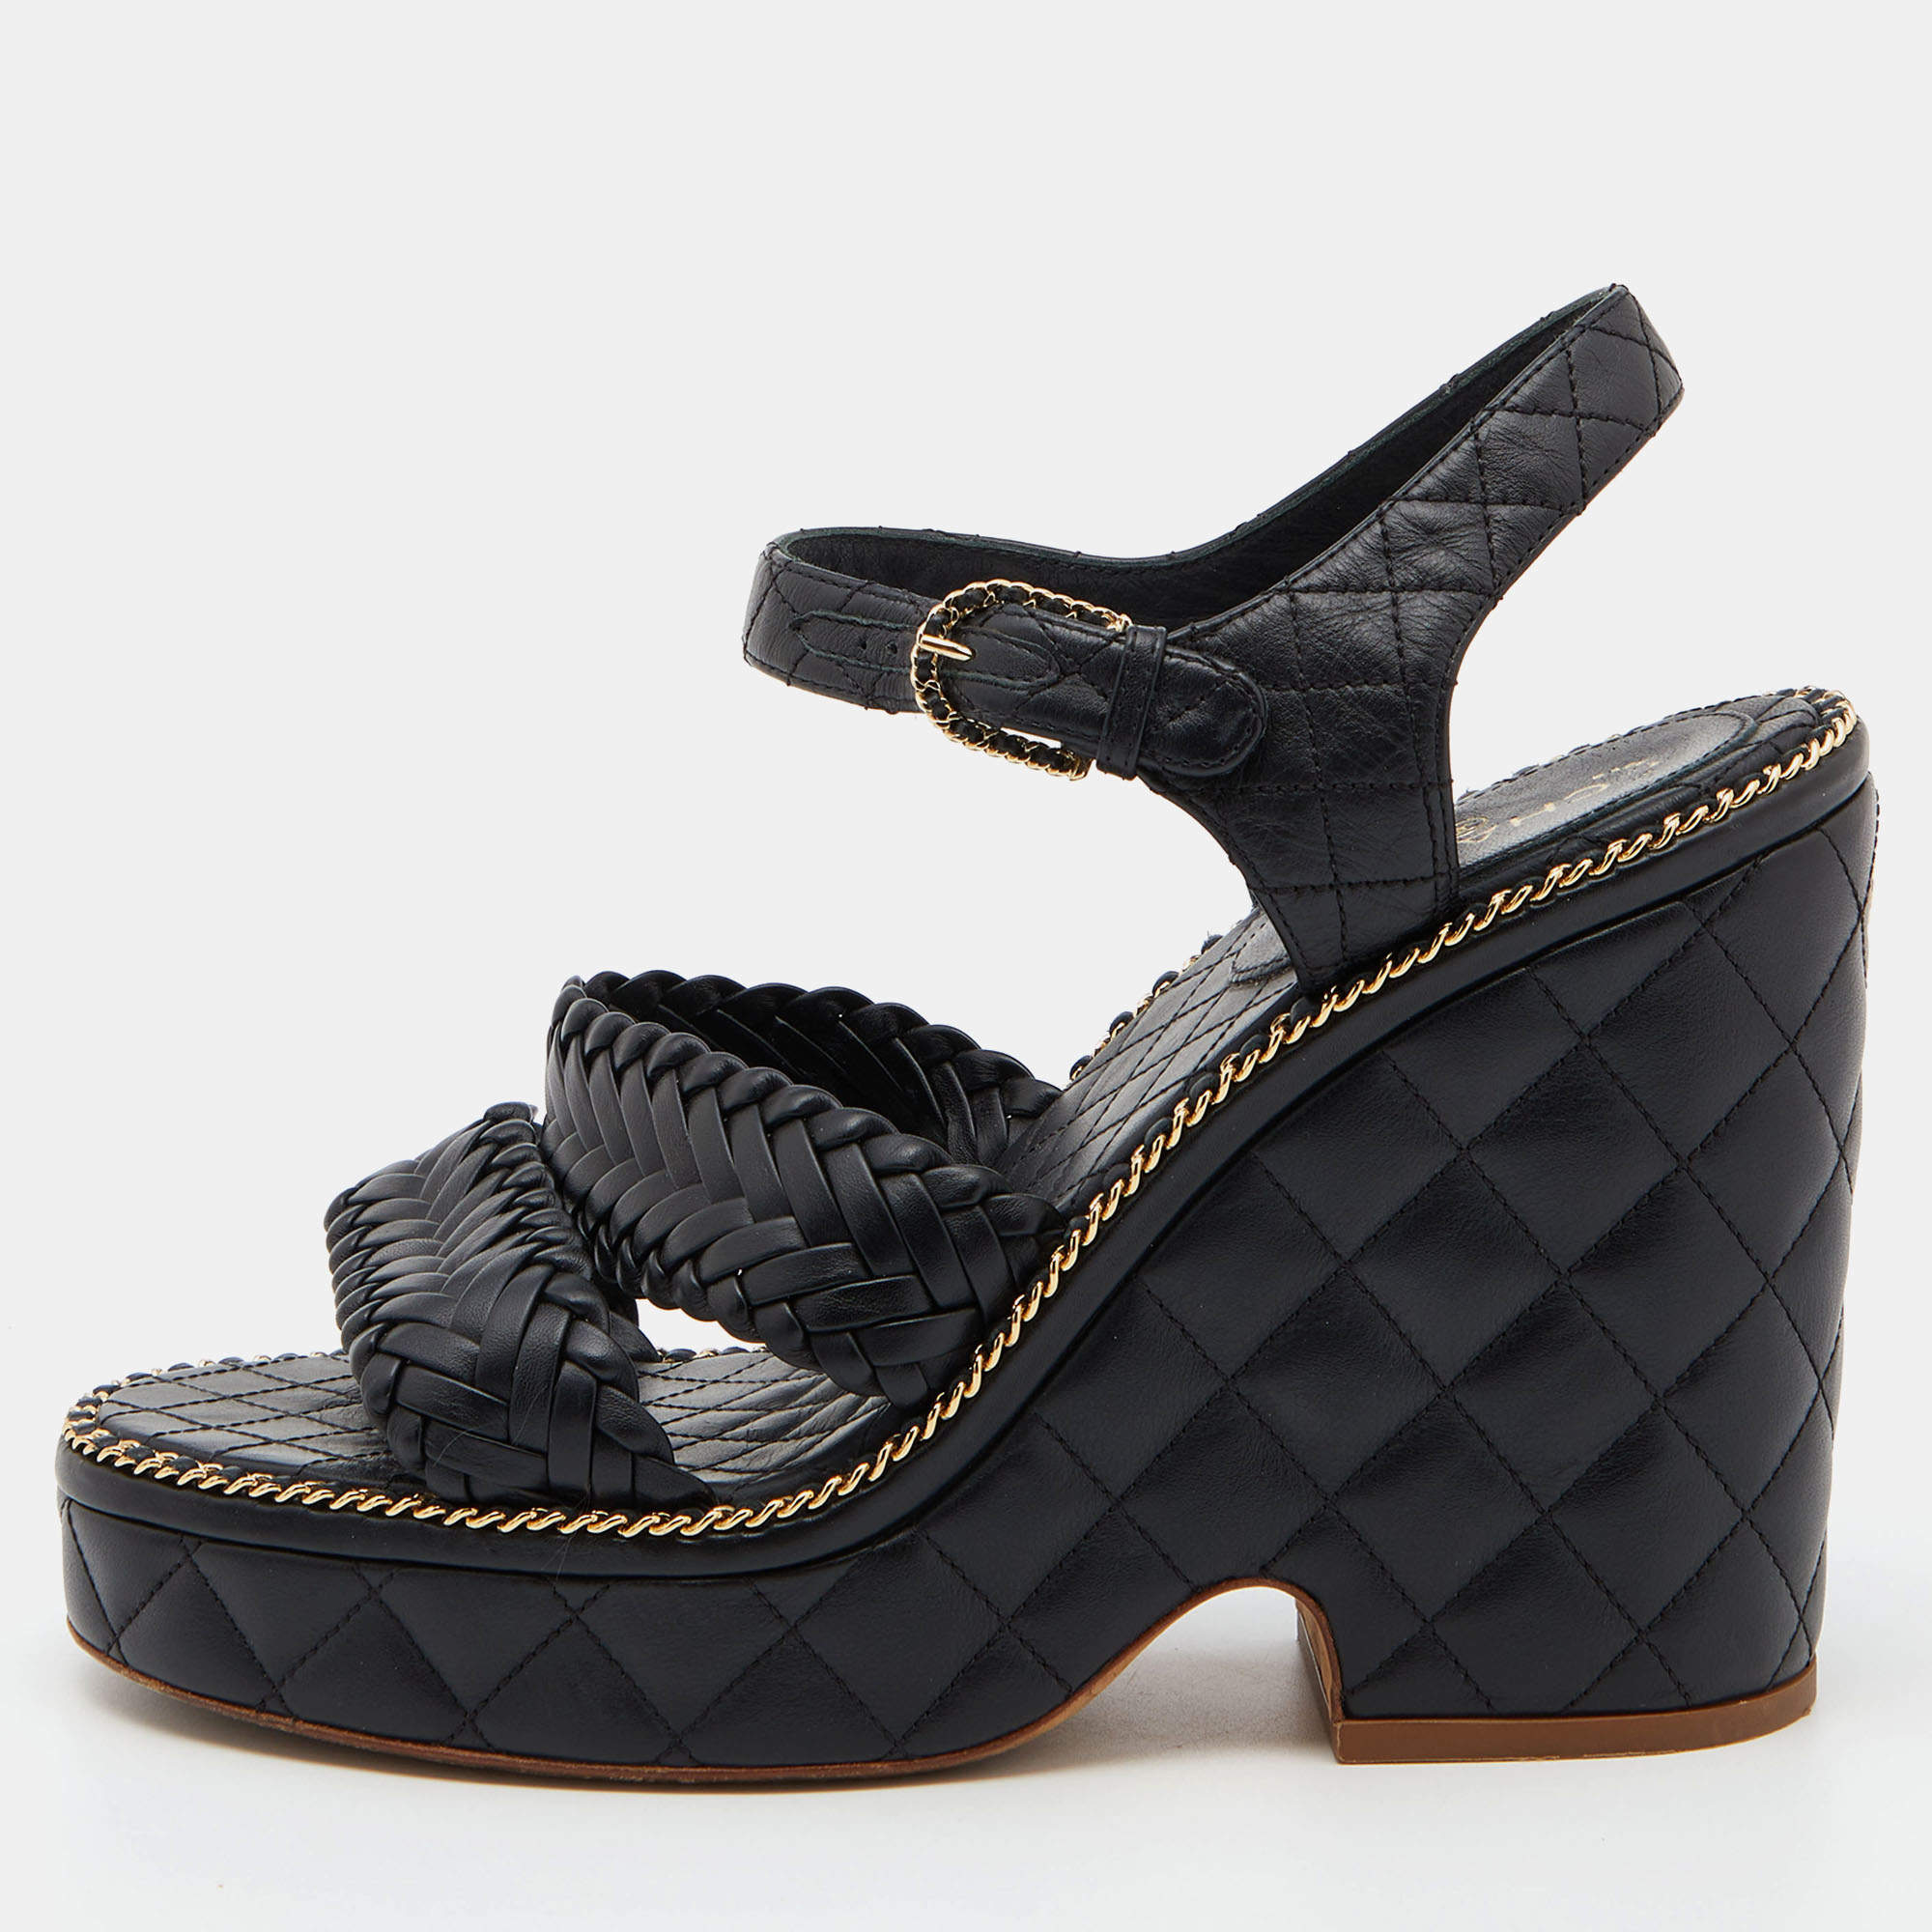 Chanel CC Leather Wedge Sandals - Shoes - CHA445081, The RealReal